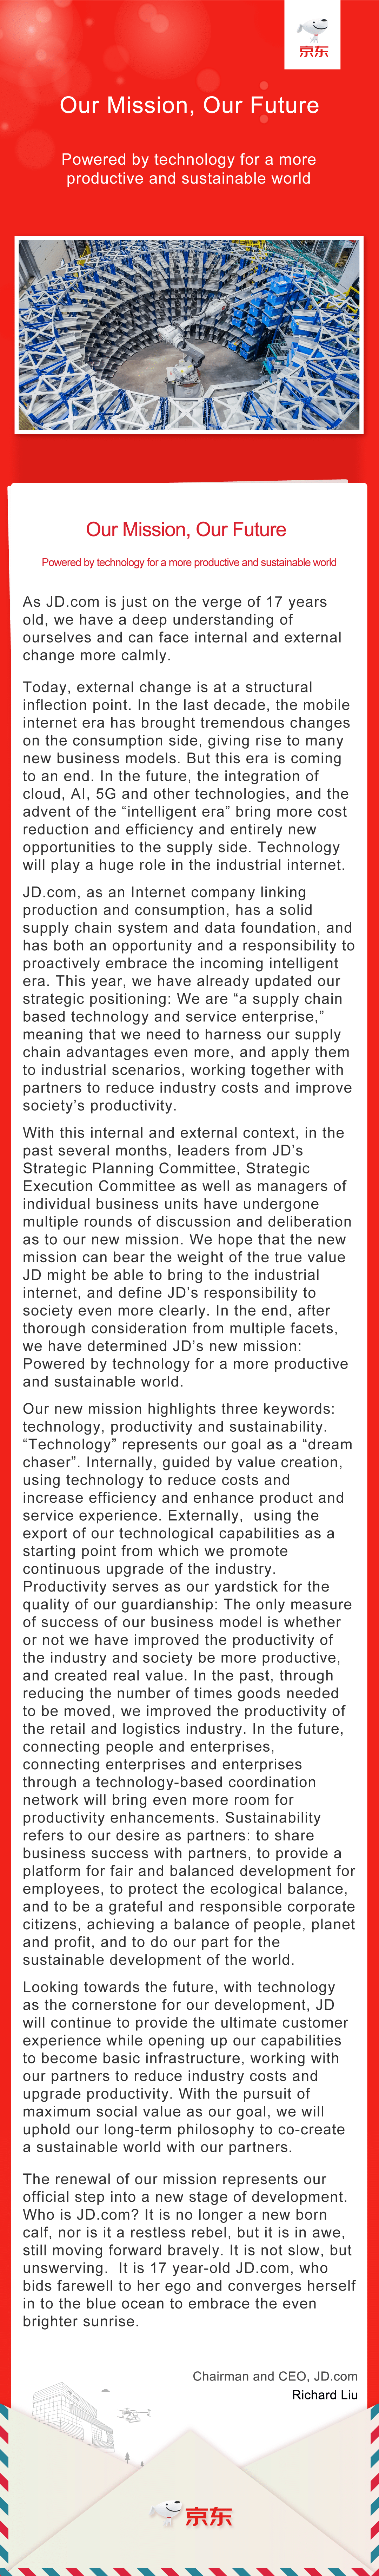 Mission Statement of JD by CEO 